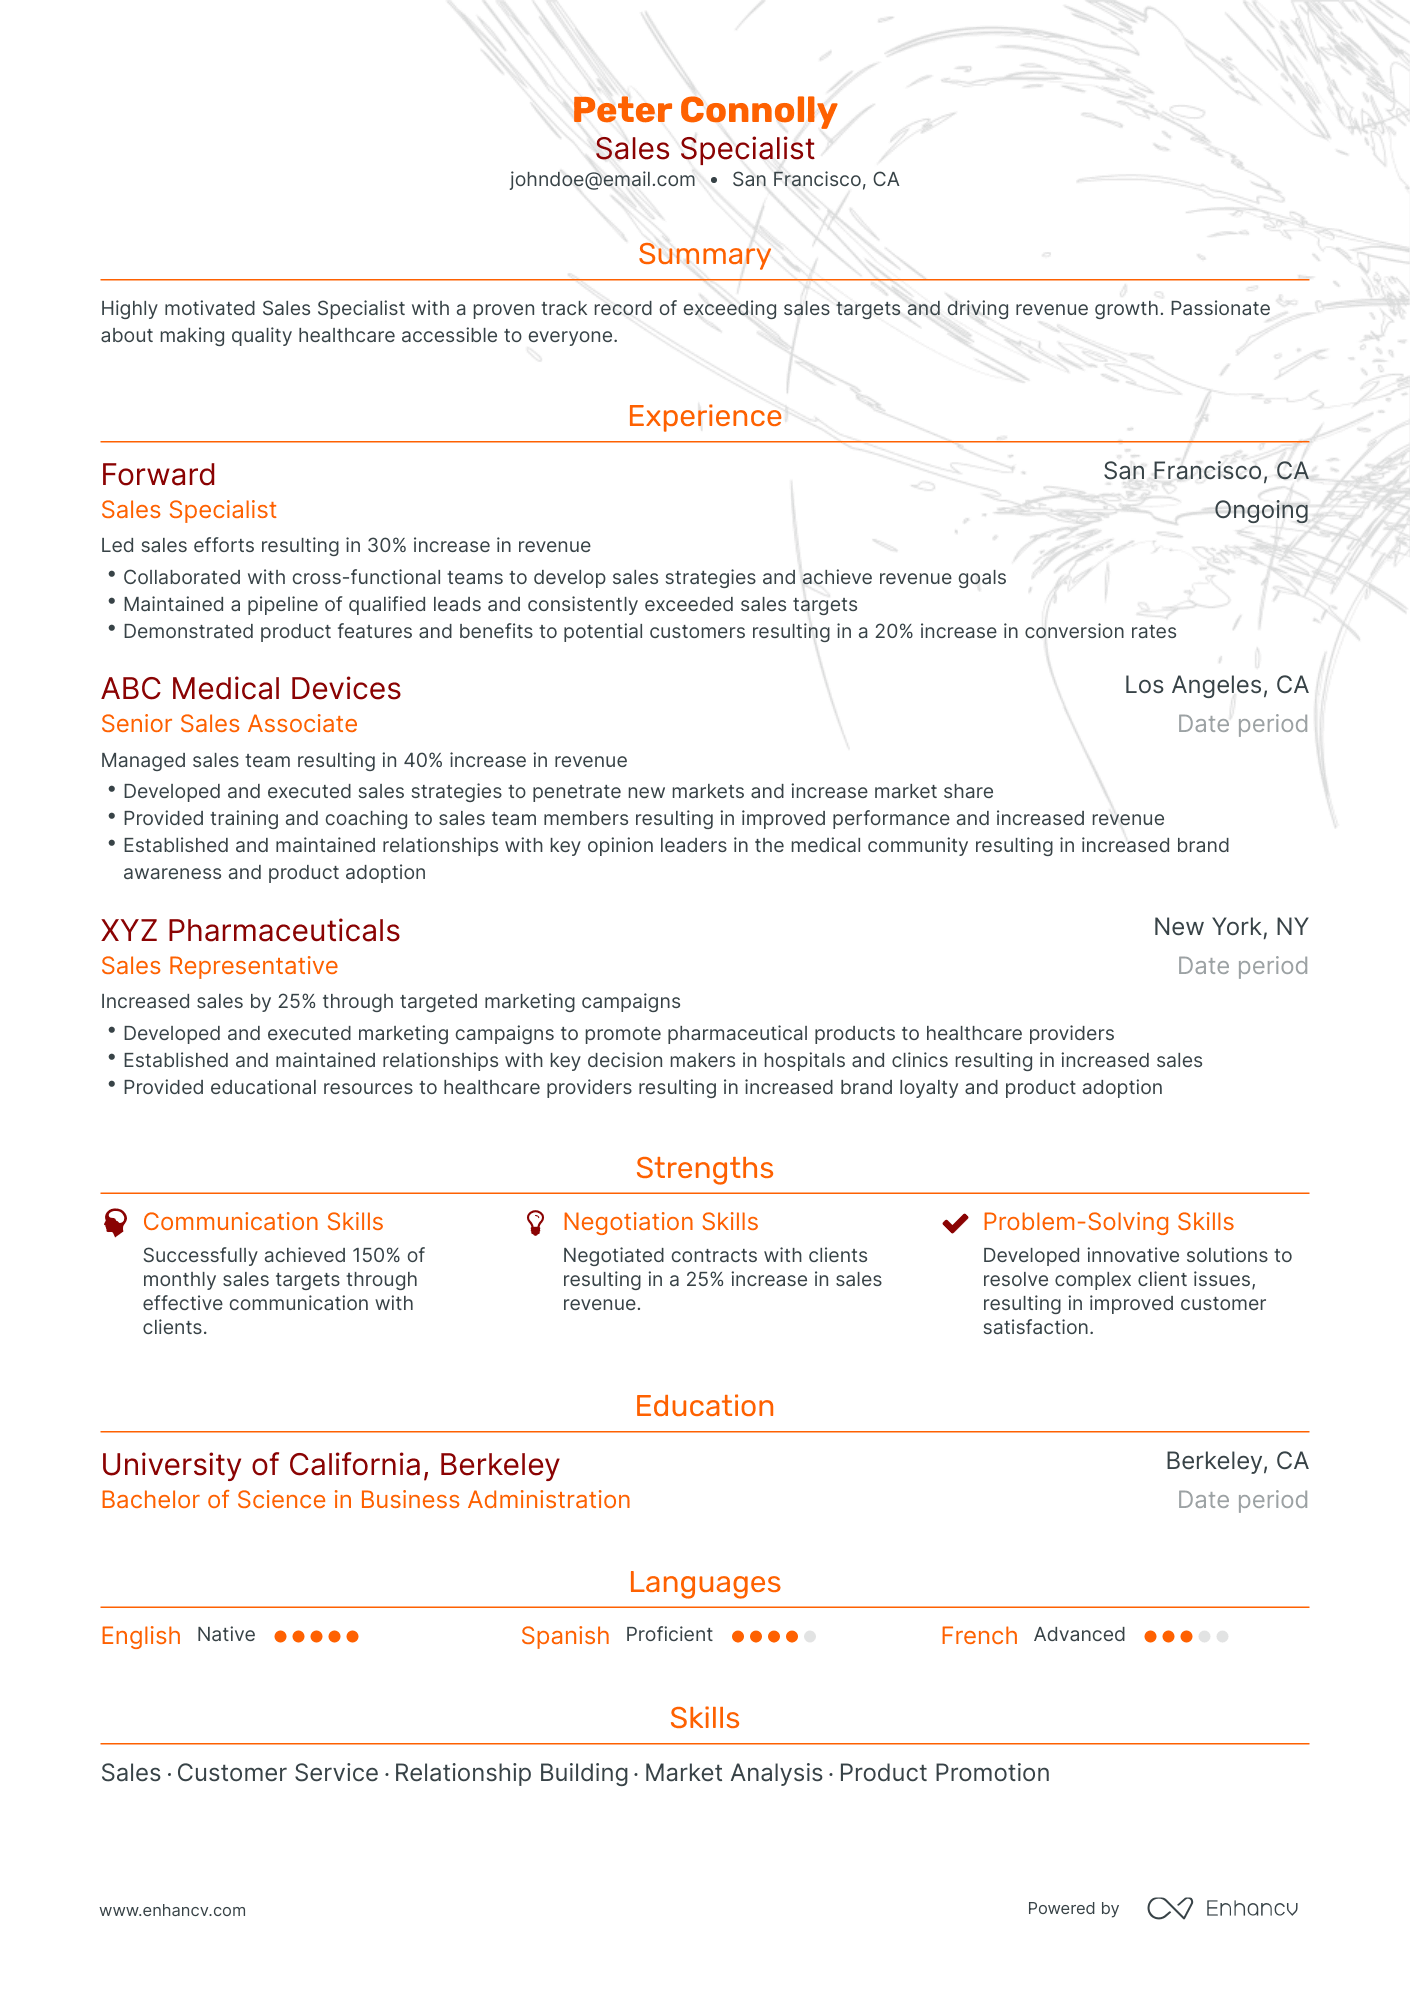 Traditional Sales Specialist Resume Template